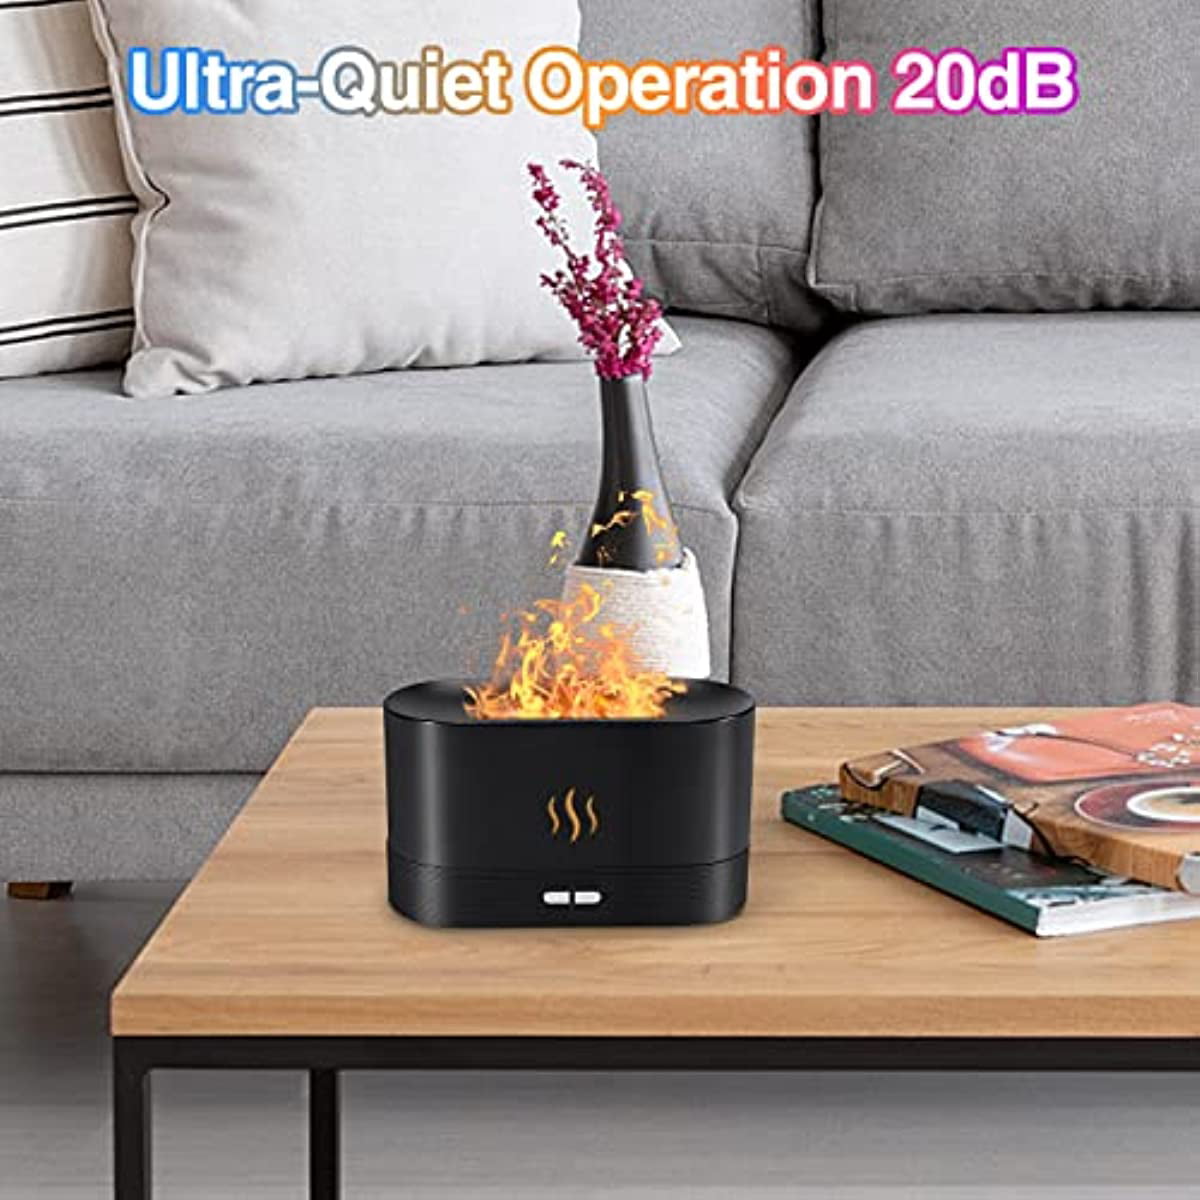 Upgraded 7 Color Flame Fireplace Air Aroma Essential Oil Diffuser,USB  Personal Desktop Noiseless Cool Mist Humidifier with Auto-Off Protection  for